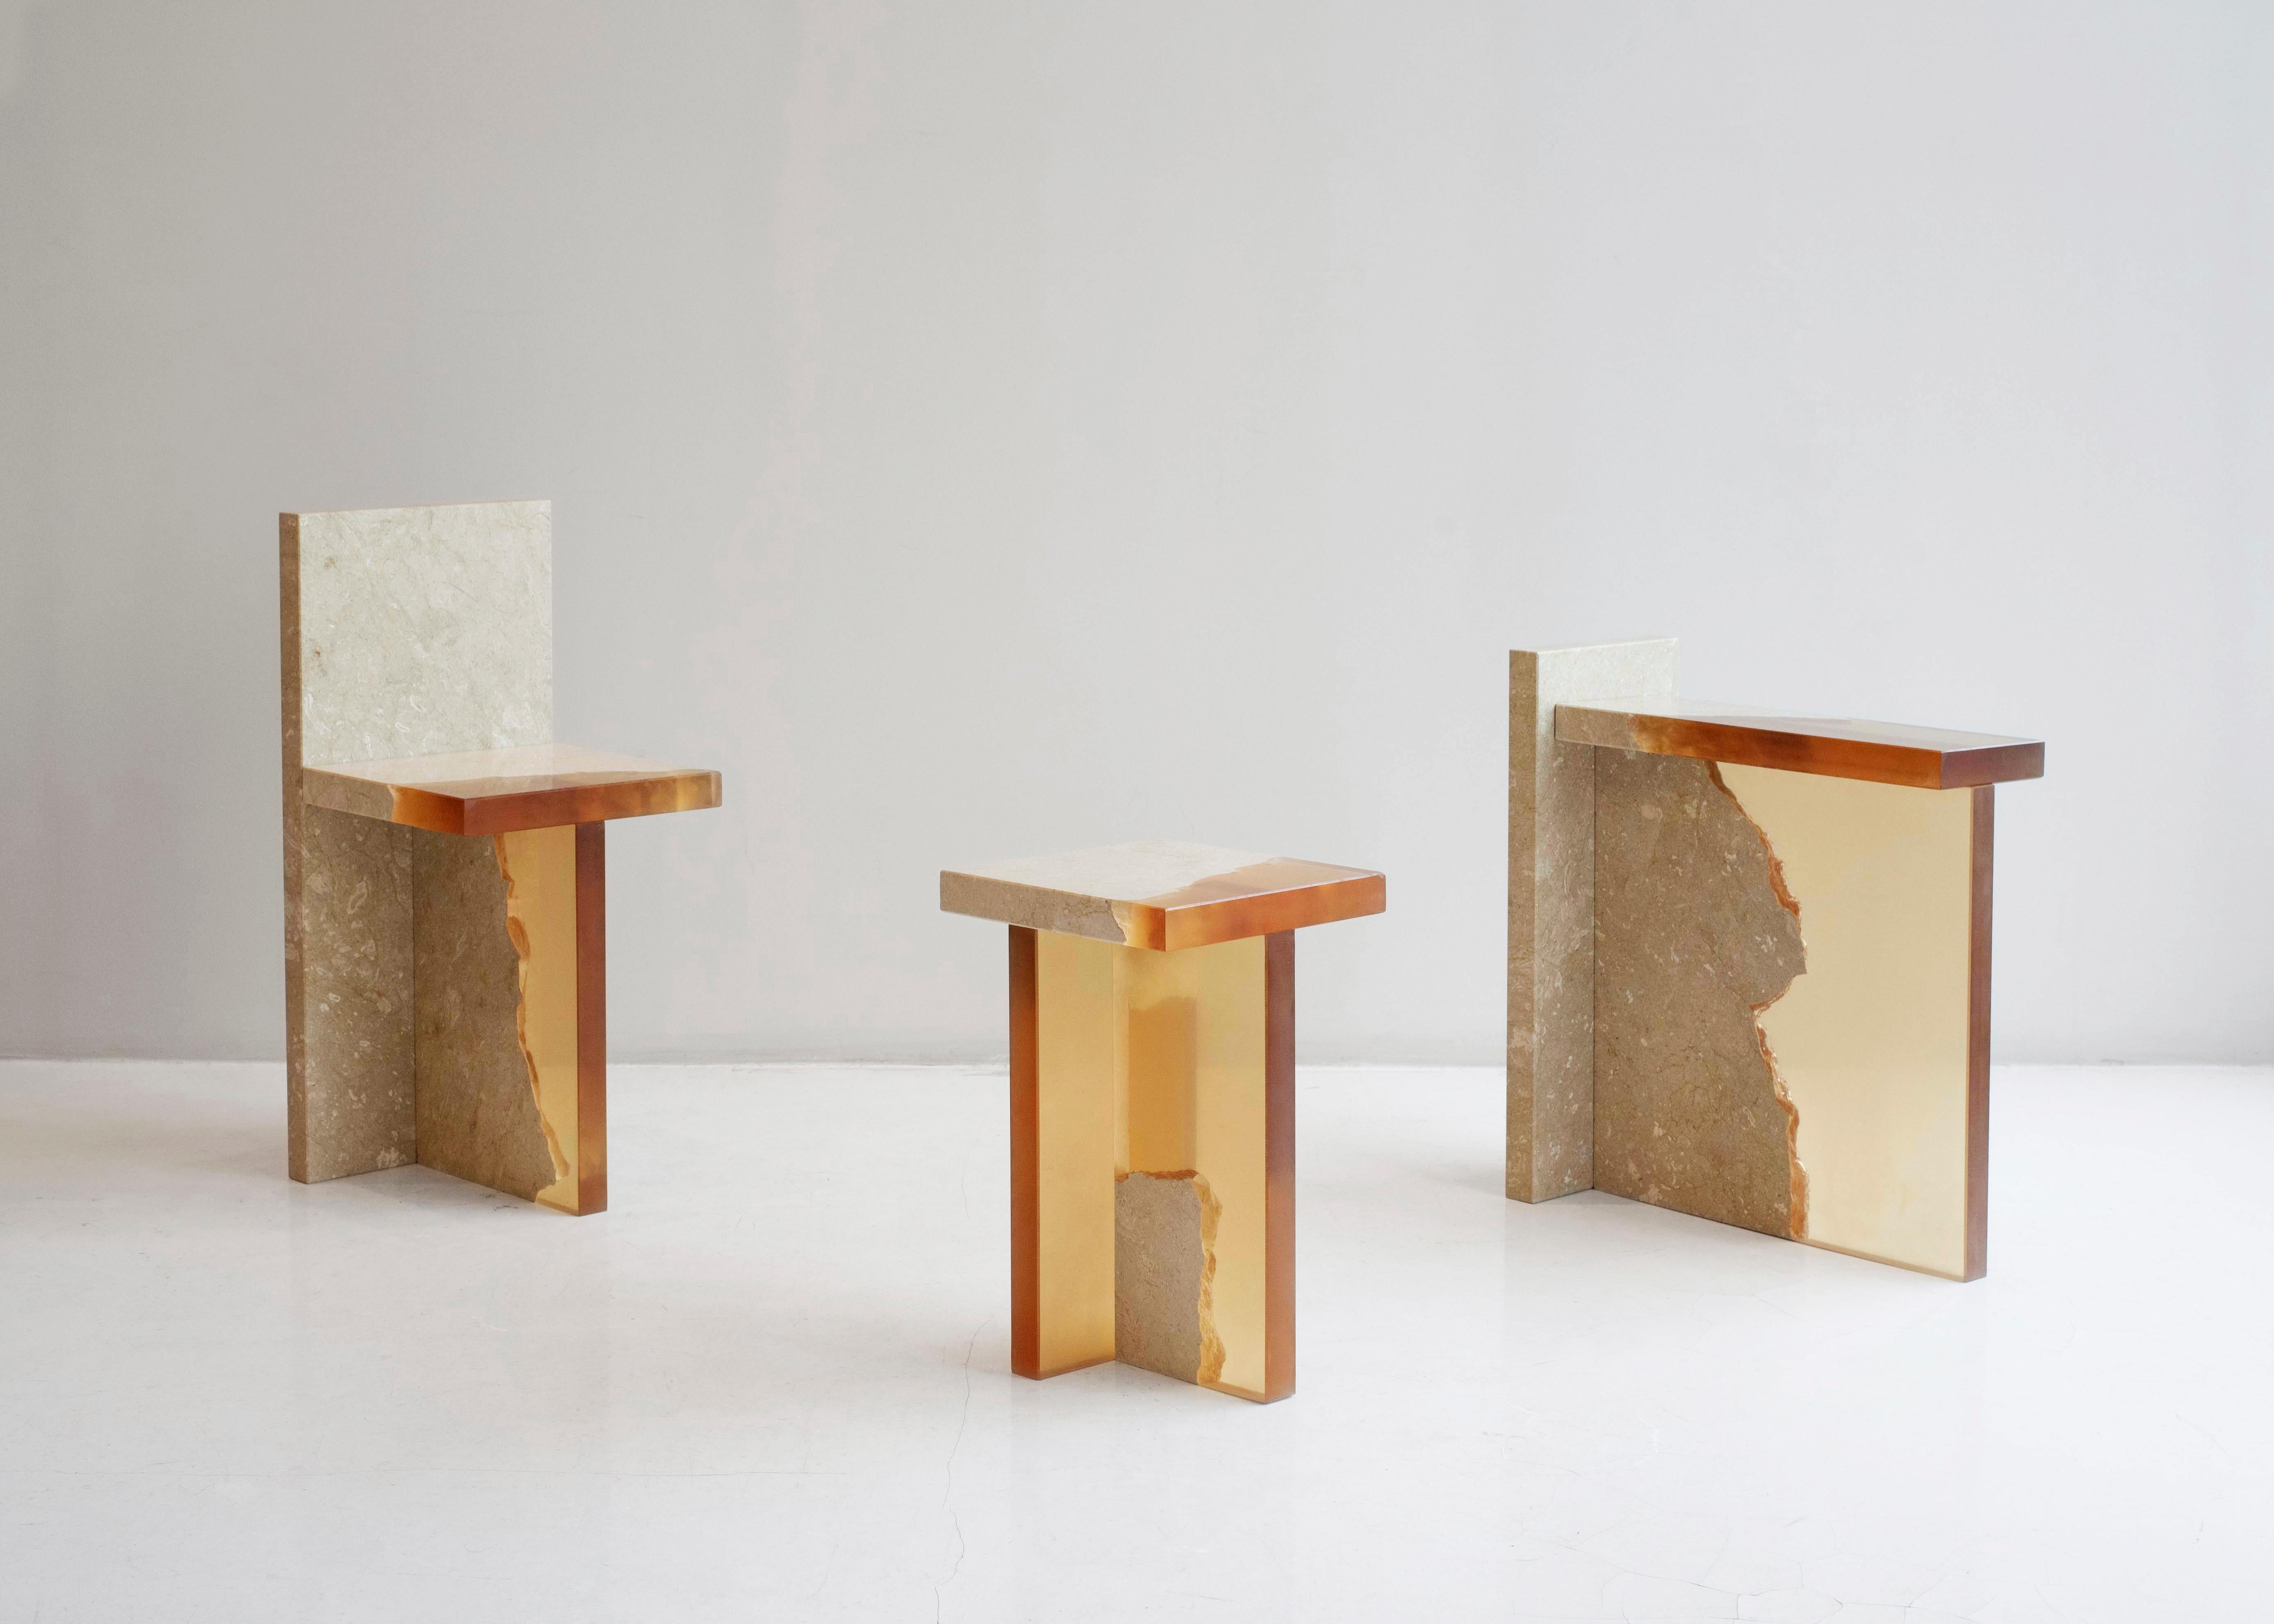 Pair of Crystal Resin and Marble, Fragment Chair, Jang Hea Kyoung 2